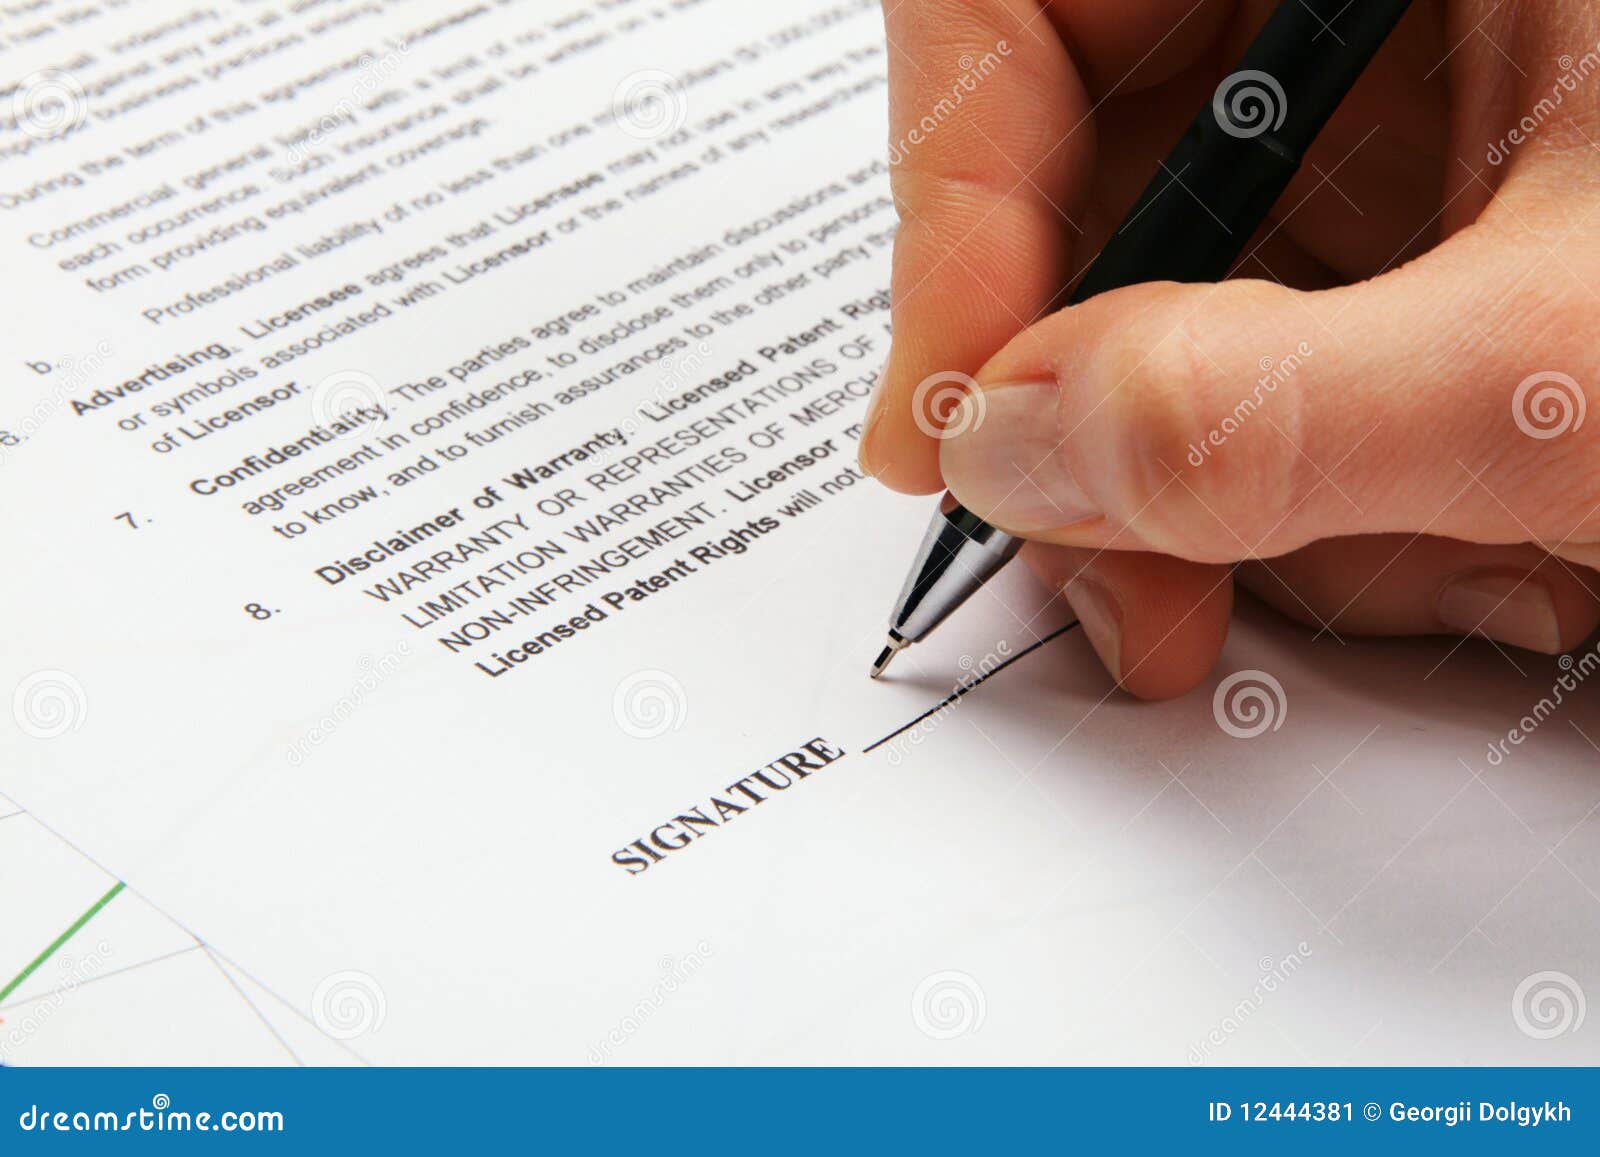 signing a generic license agreement